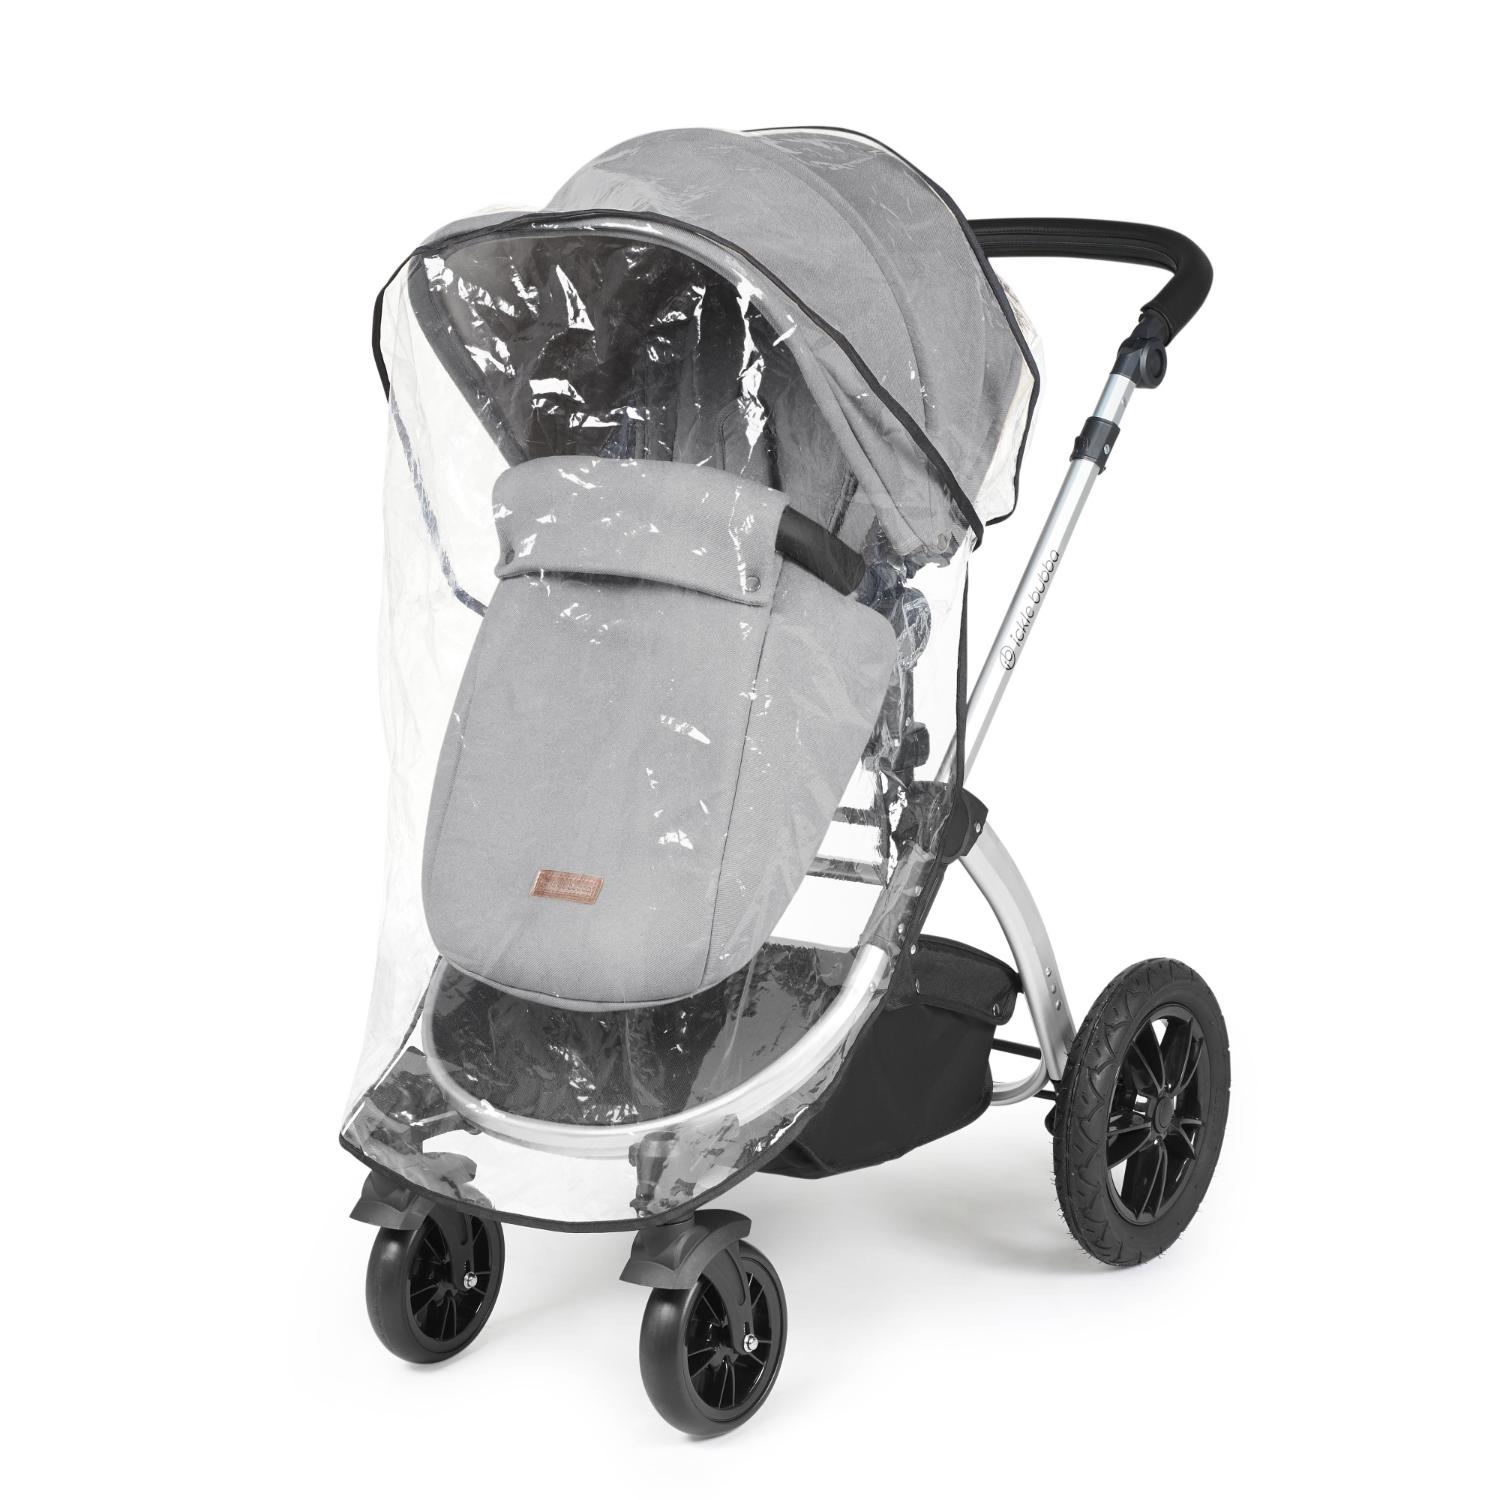 Rain cover placed on an Ickle Bubba Stomp Luxe Pushchair in Pearl Grey colour with silver chassis